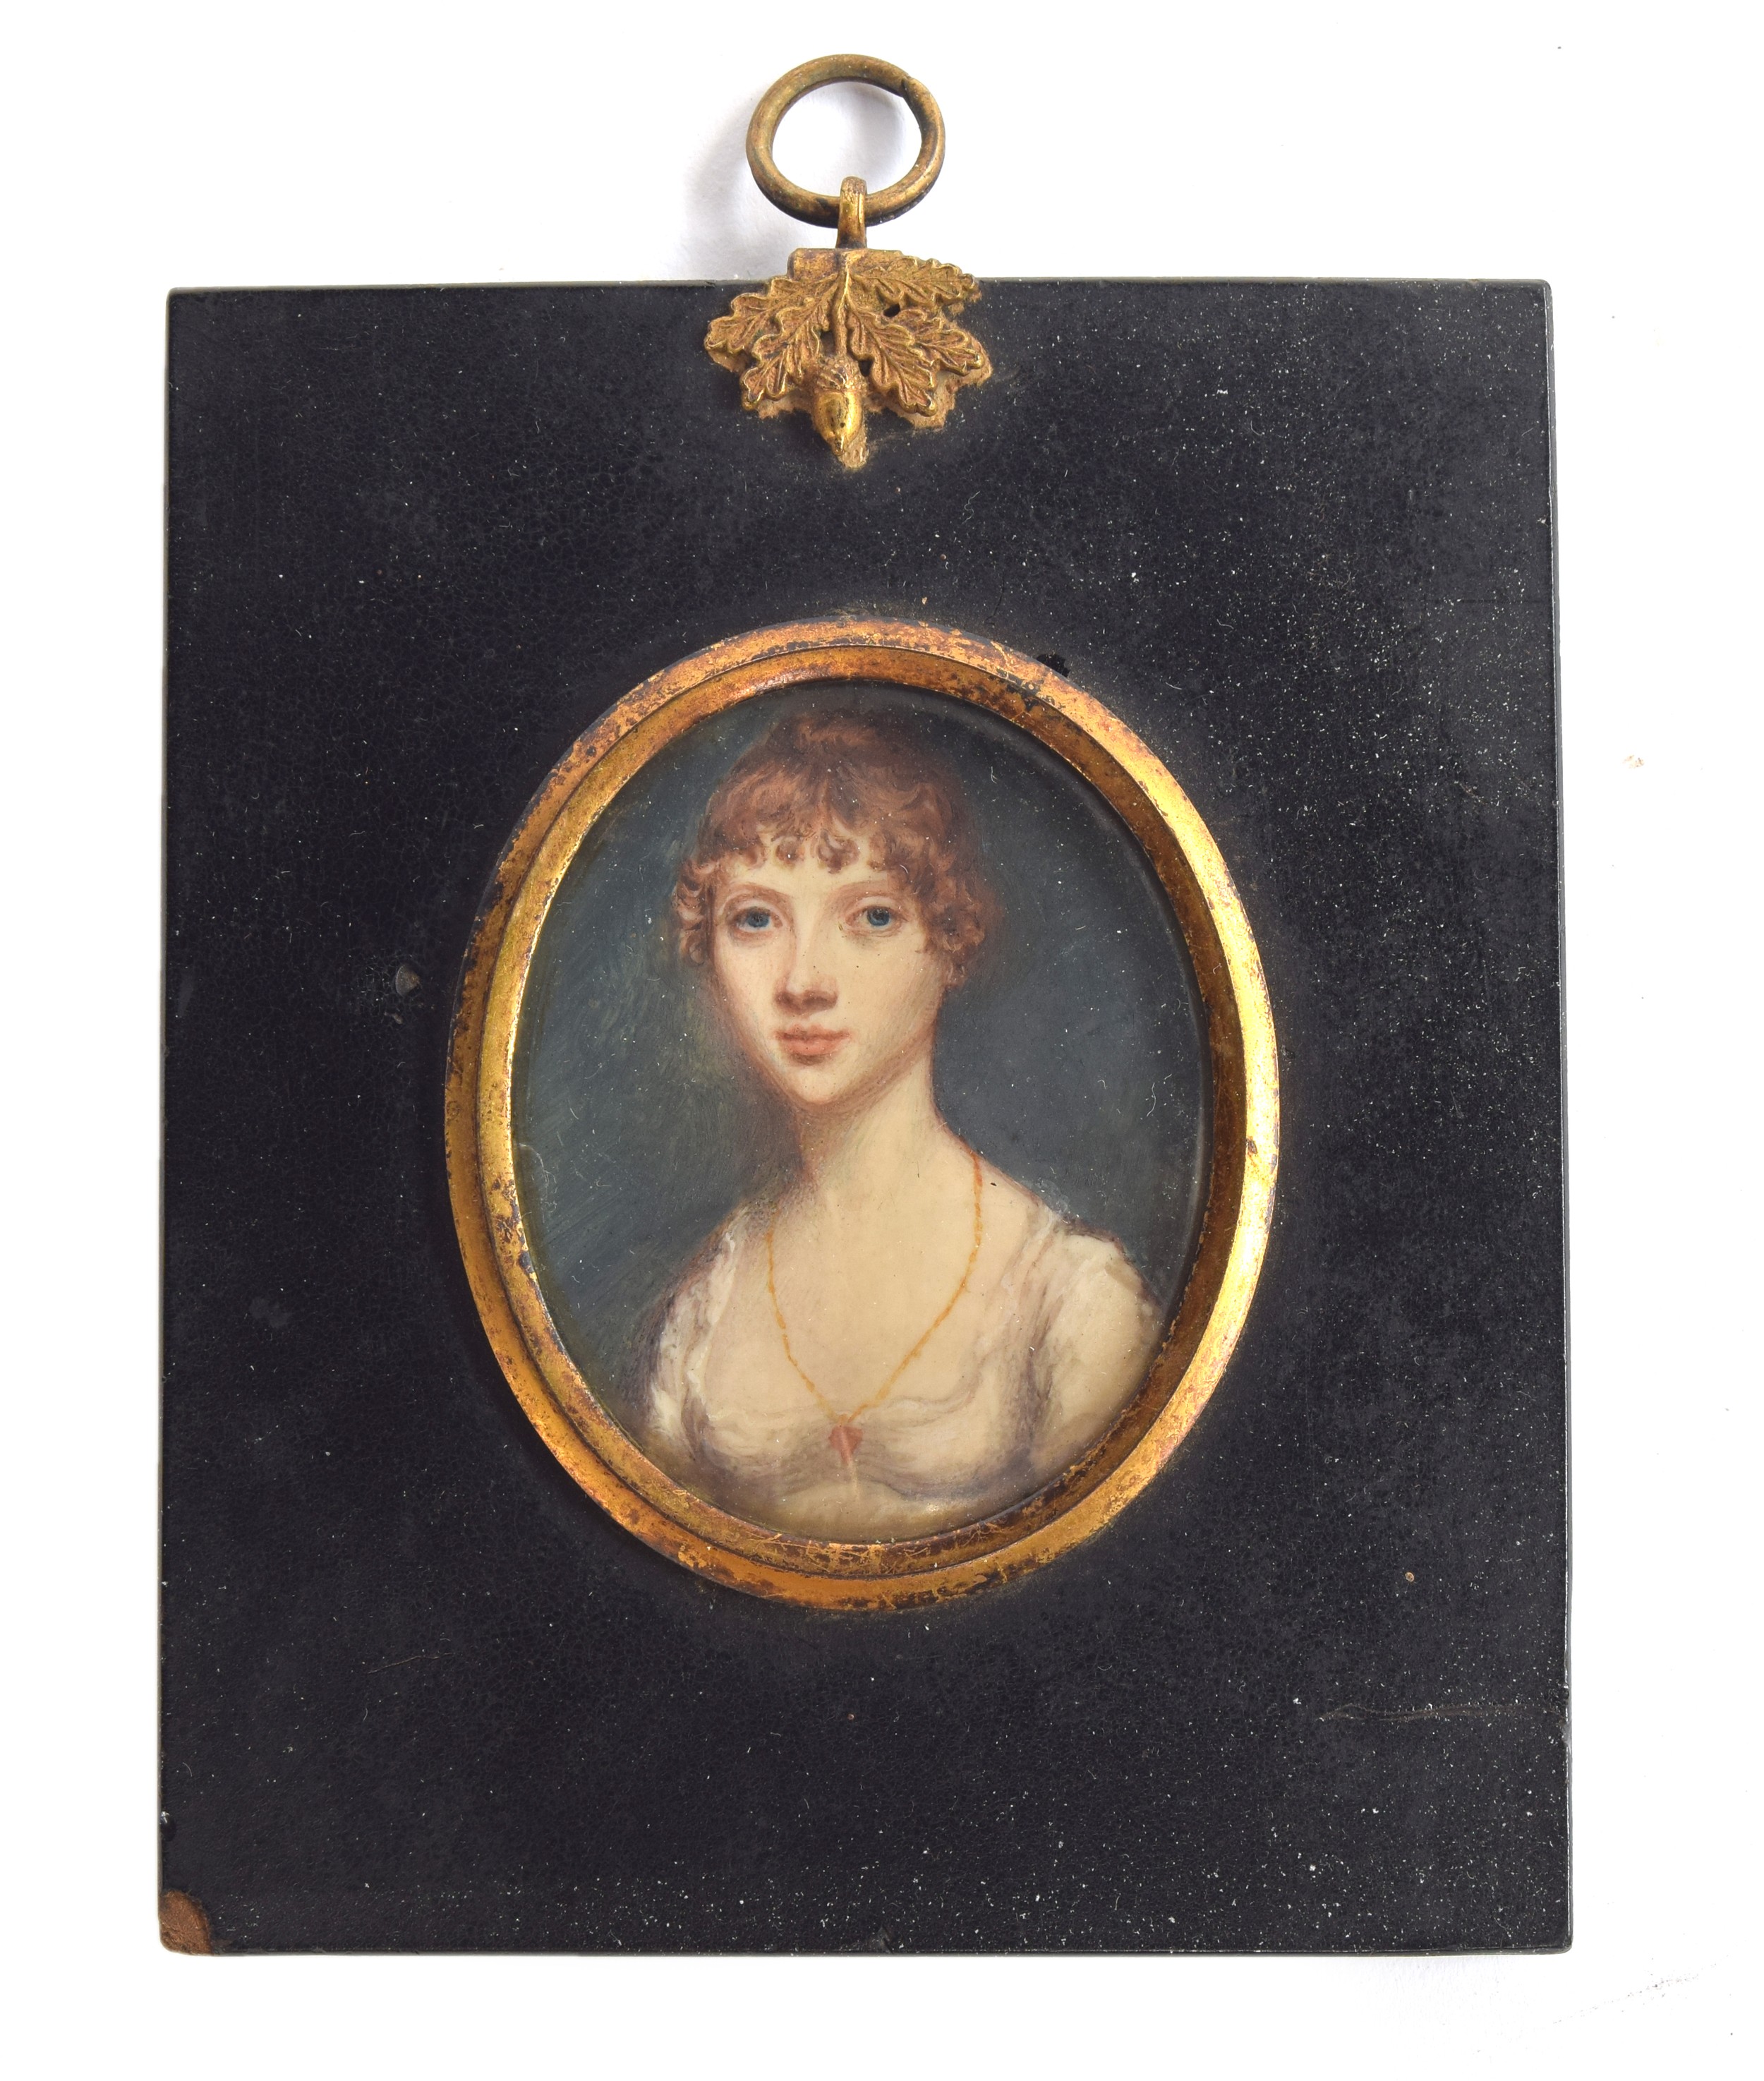 A late 18th century portrait miniature of James Gunter, 'Born 1755, Obit 1801', painted by J. - Image 2 of 6